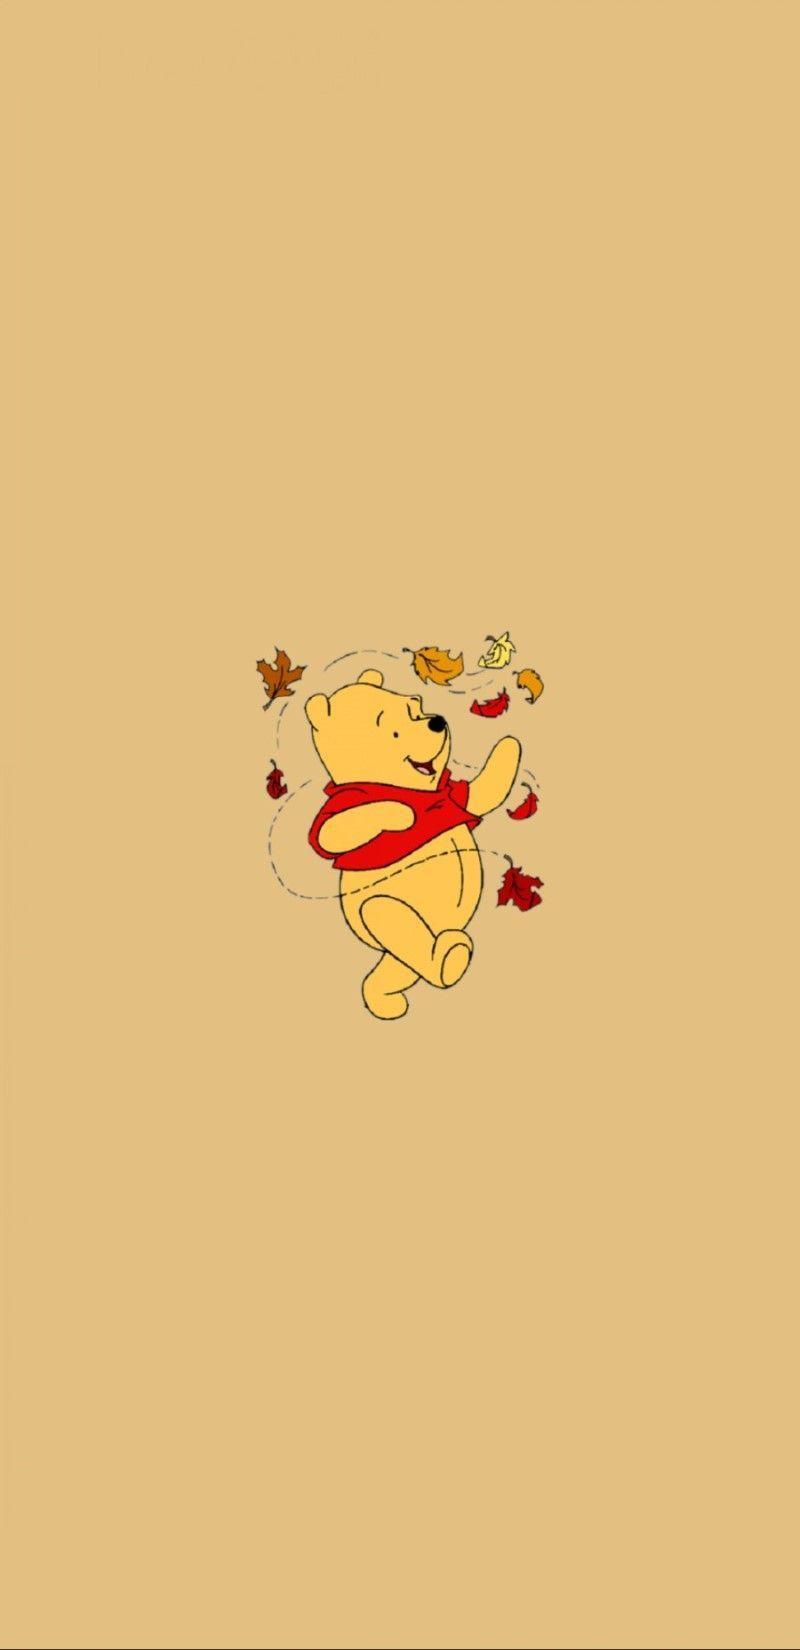 Download wallpaper 750x1334 christopher robin teddy winnie the pooh  animation movie iphone 7 iphone 8 750x1334 hd background 8679